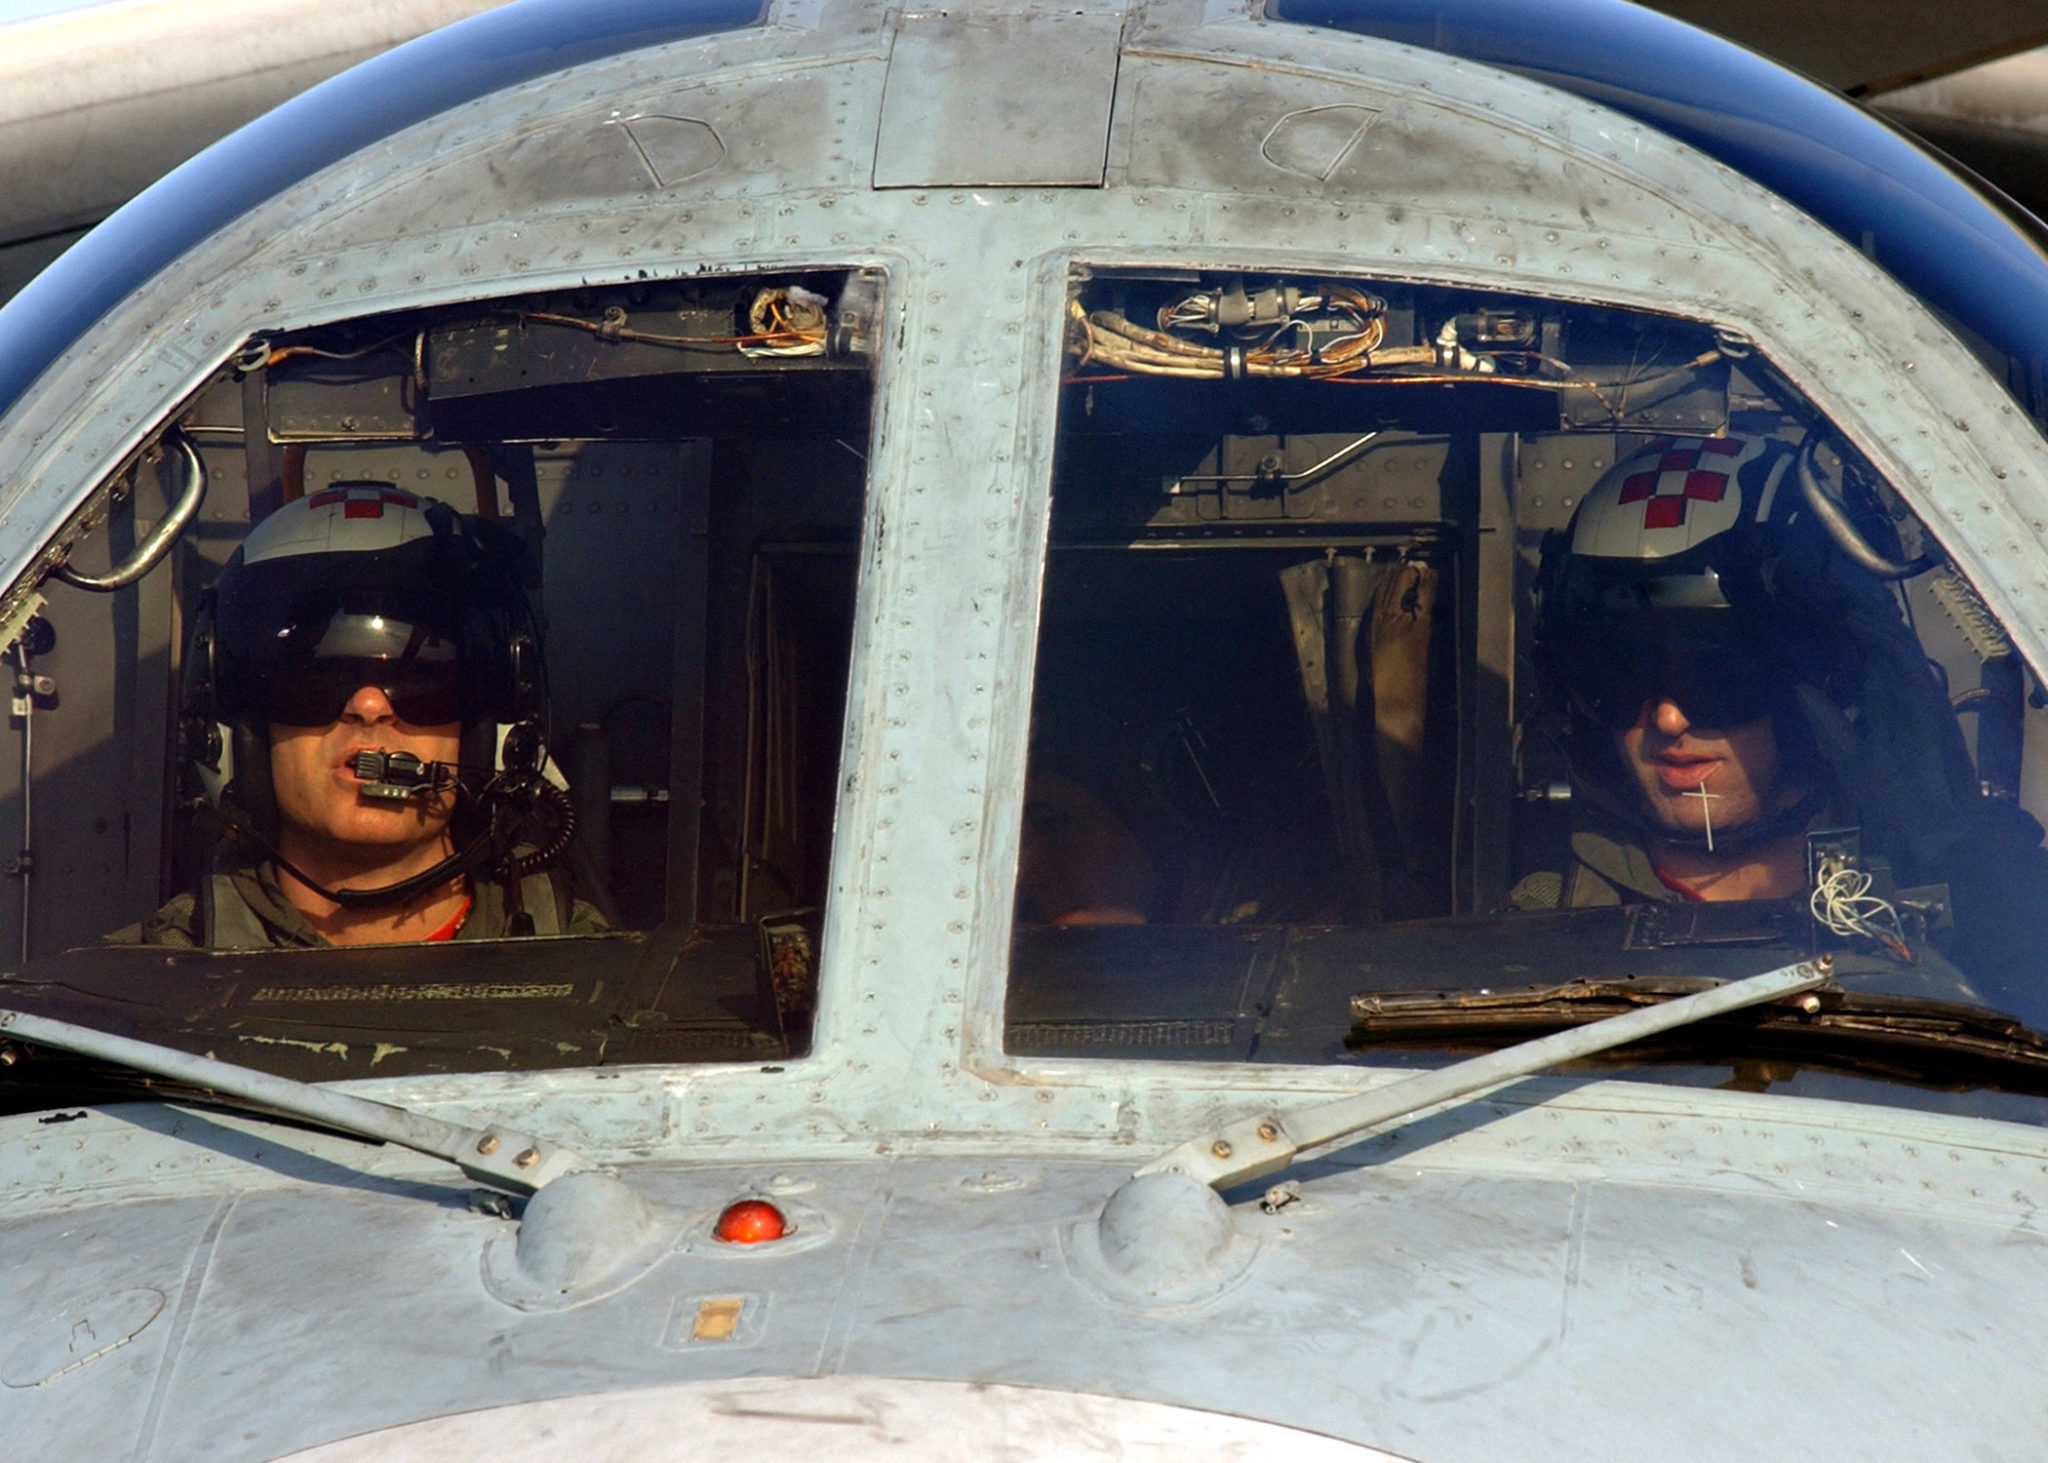 041226-N-2984R-014 Persian Gulf (Dec. 26, 2004) - Two pilots assigned to the ÒCheckmatesÓ of Sea Control Squadron Two Two (VS-22), conduct start-up procedures before launching off the flight deck aboard the Nimitz-class aircraft carrier USS Harry S. Truman (CVN 75). Carrier Air Wing Three (CVW-3) embarked aboard Truman is providing close air support and conducting intelligence, surveillance and reconnaissance missions over Iraq. The Truman Strike Group is on a regularly scheduled deployment in support of the Global War on Terrorism. U.S. Navy photo by PhotographerÕs Mate Airman Apprentice Ricardo J. Reyes (RELEASED)